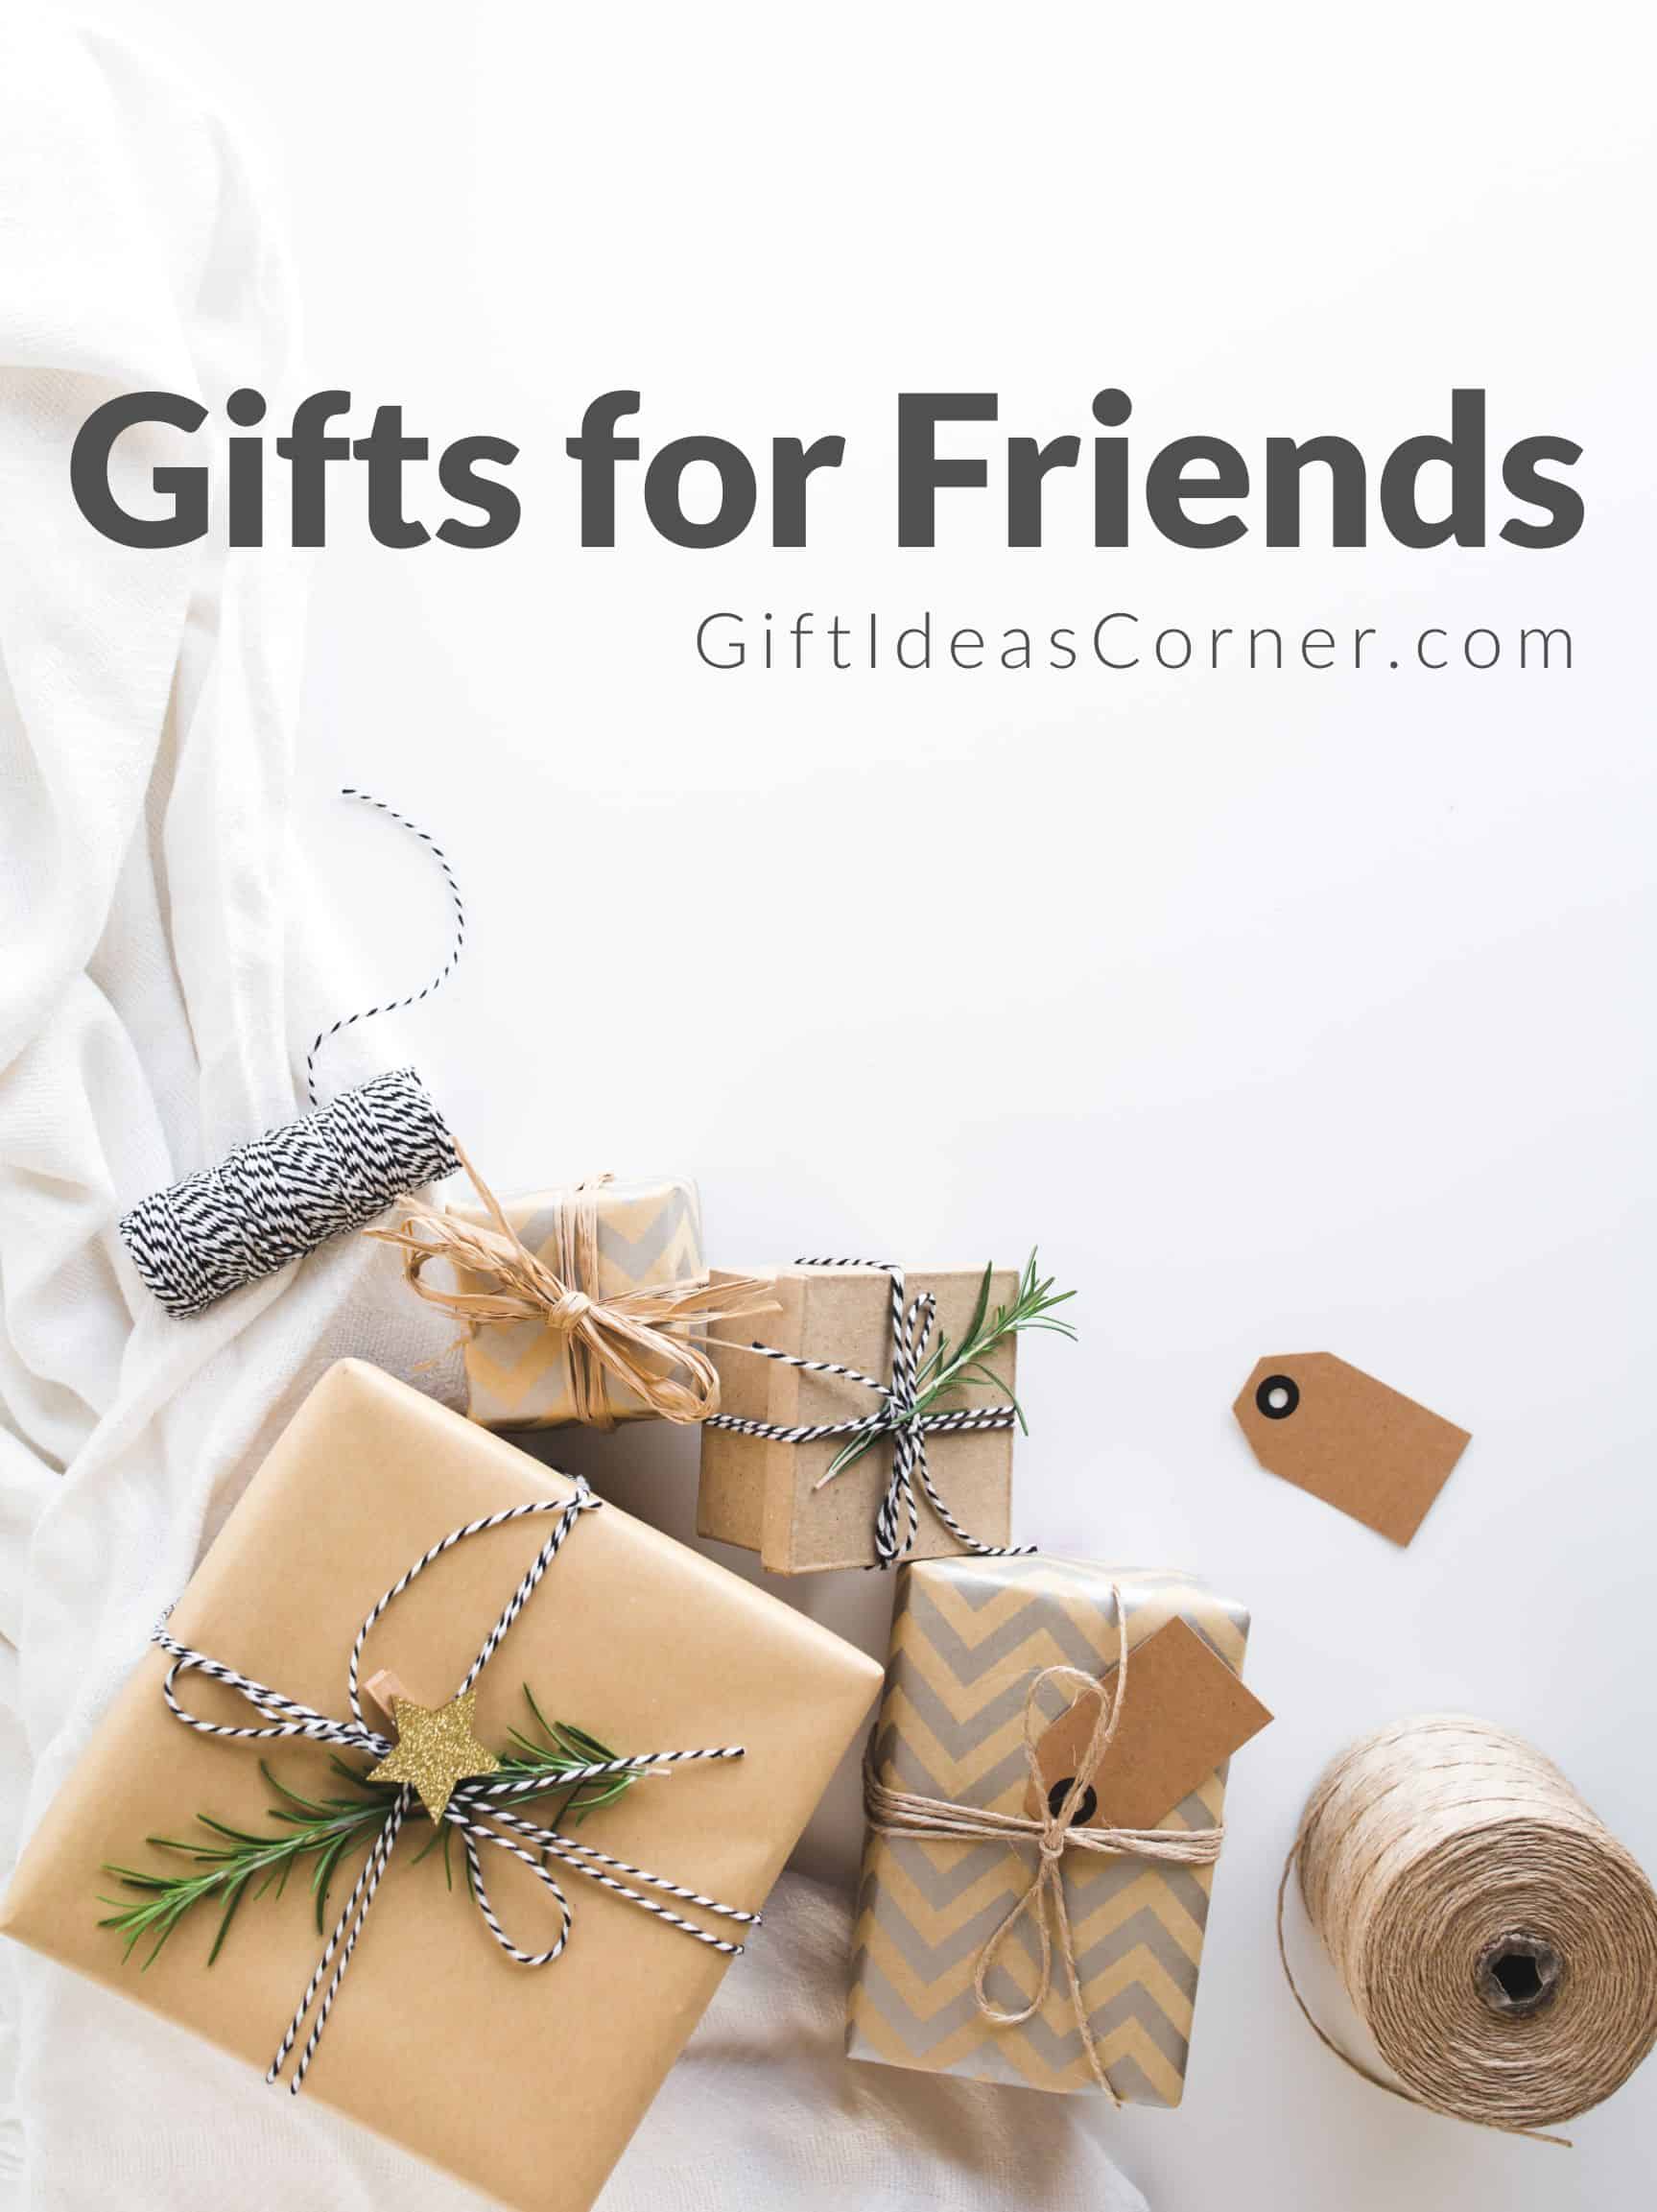 Gifts for friends